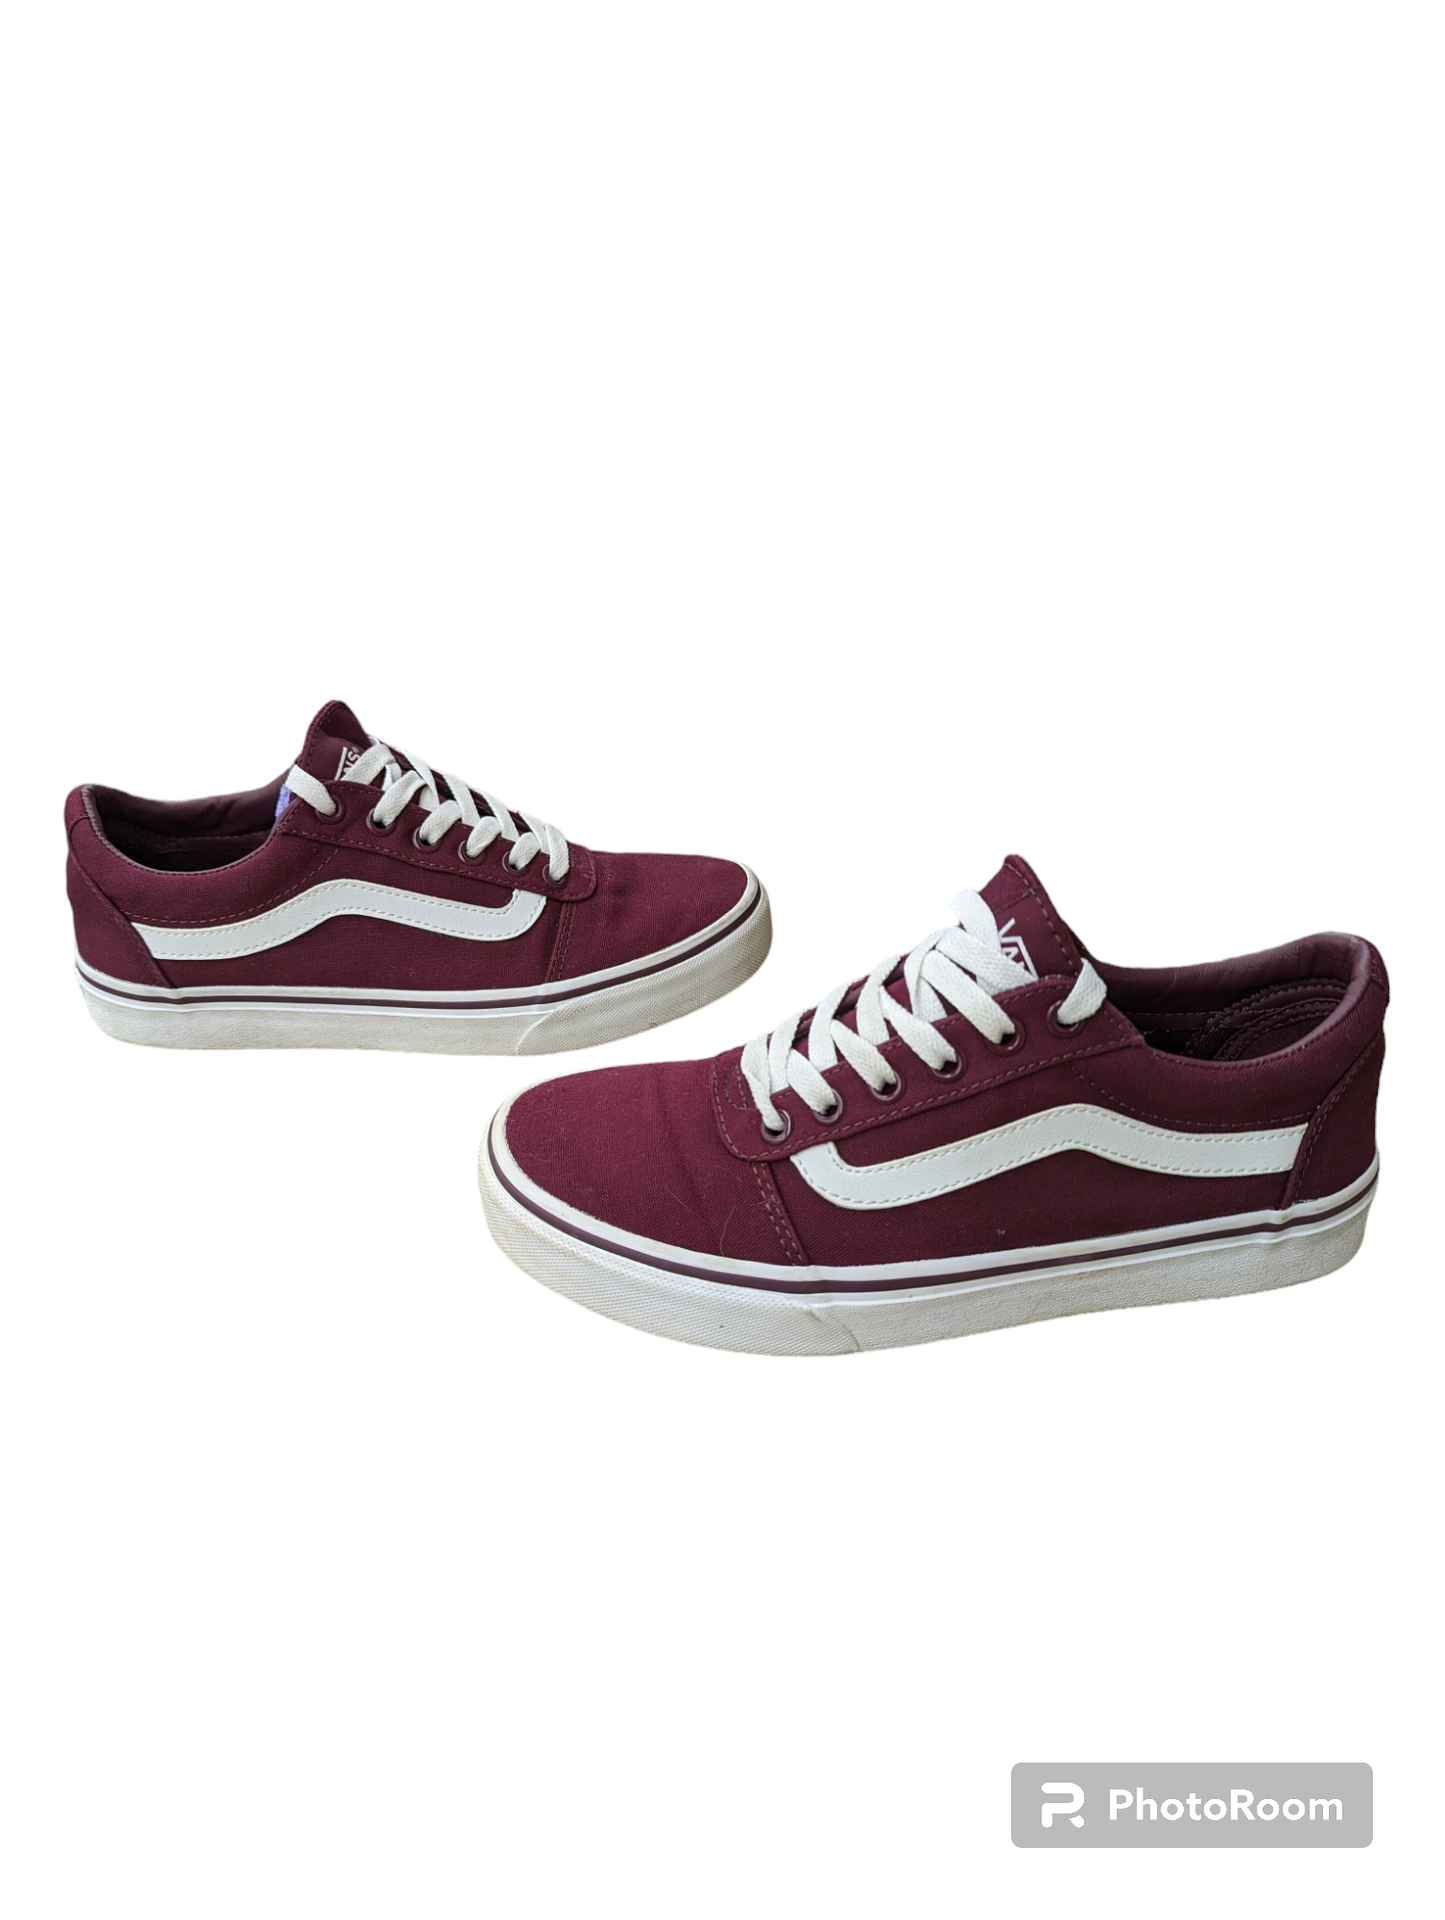 Shoes Sneakers By Vans  Size: 7.5